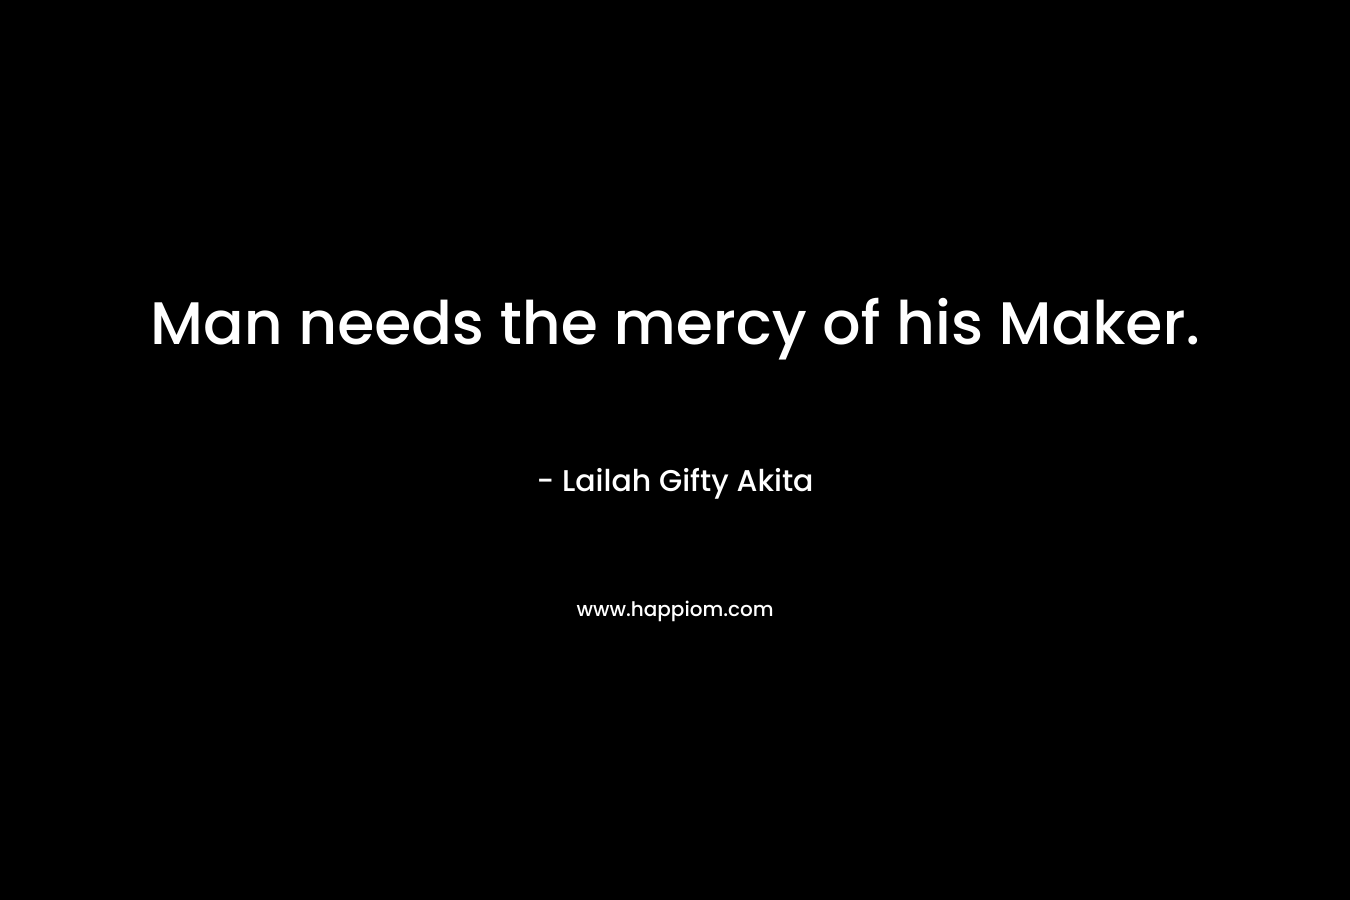 Man needs the mercy of his Maker. – Lailah Gifty Akita